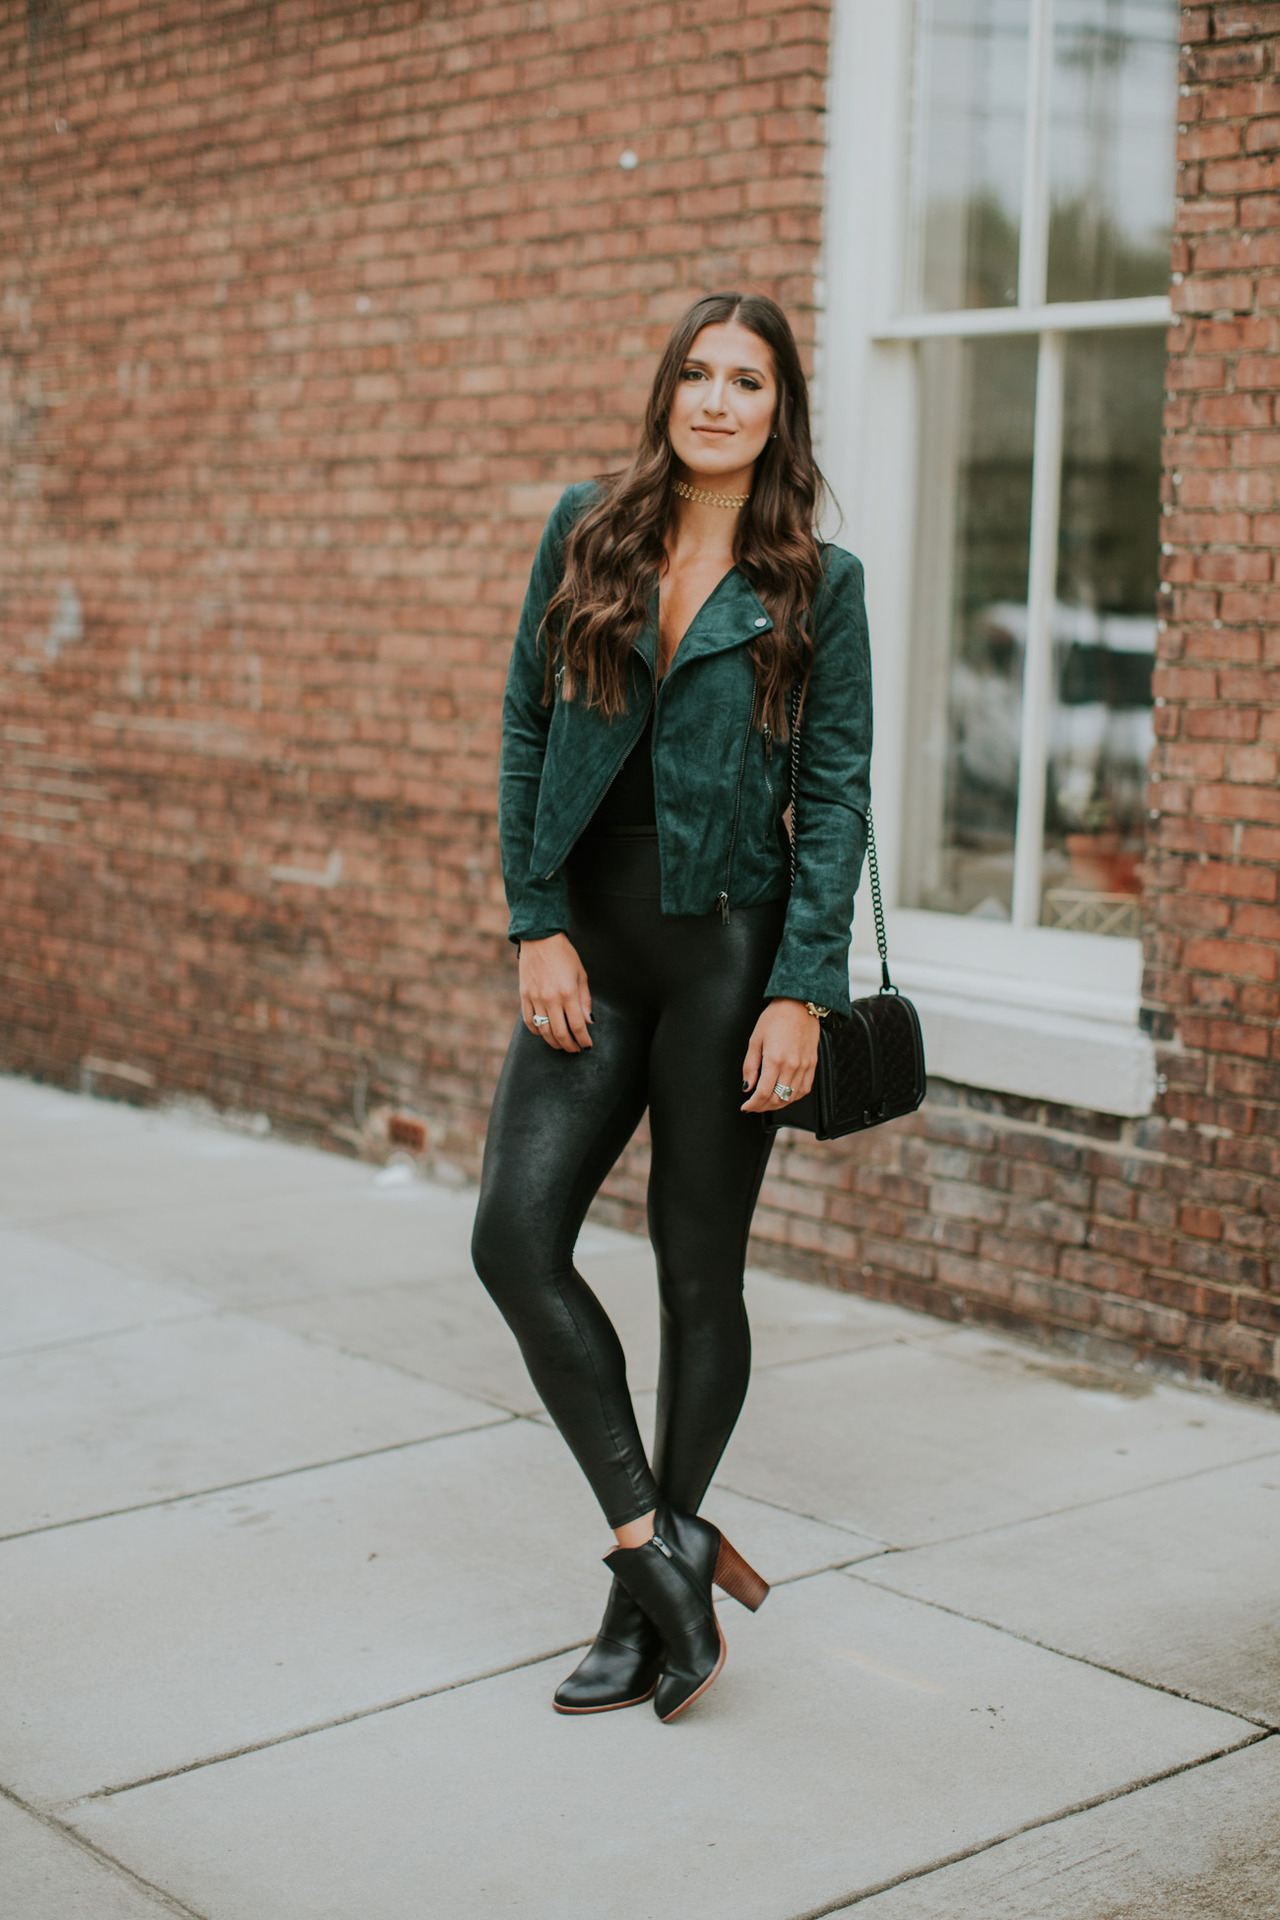 inactive = — SPANX Faux Leather Leggings